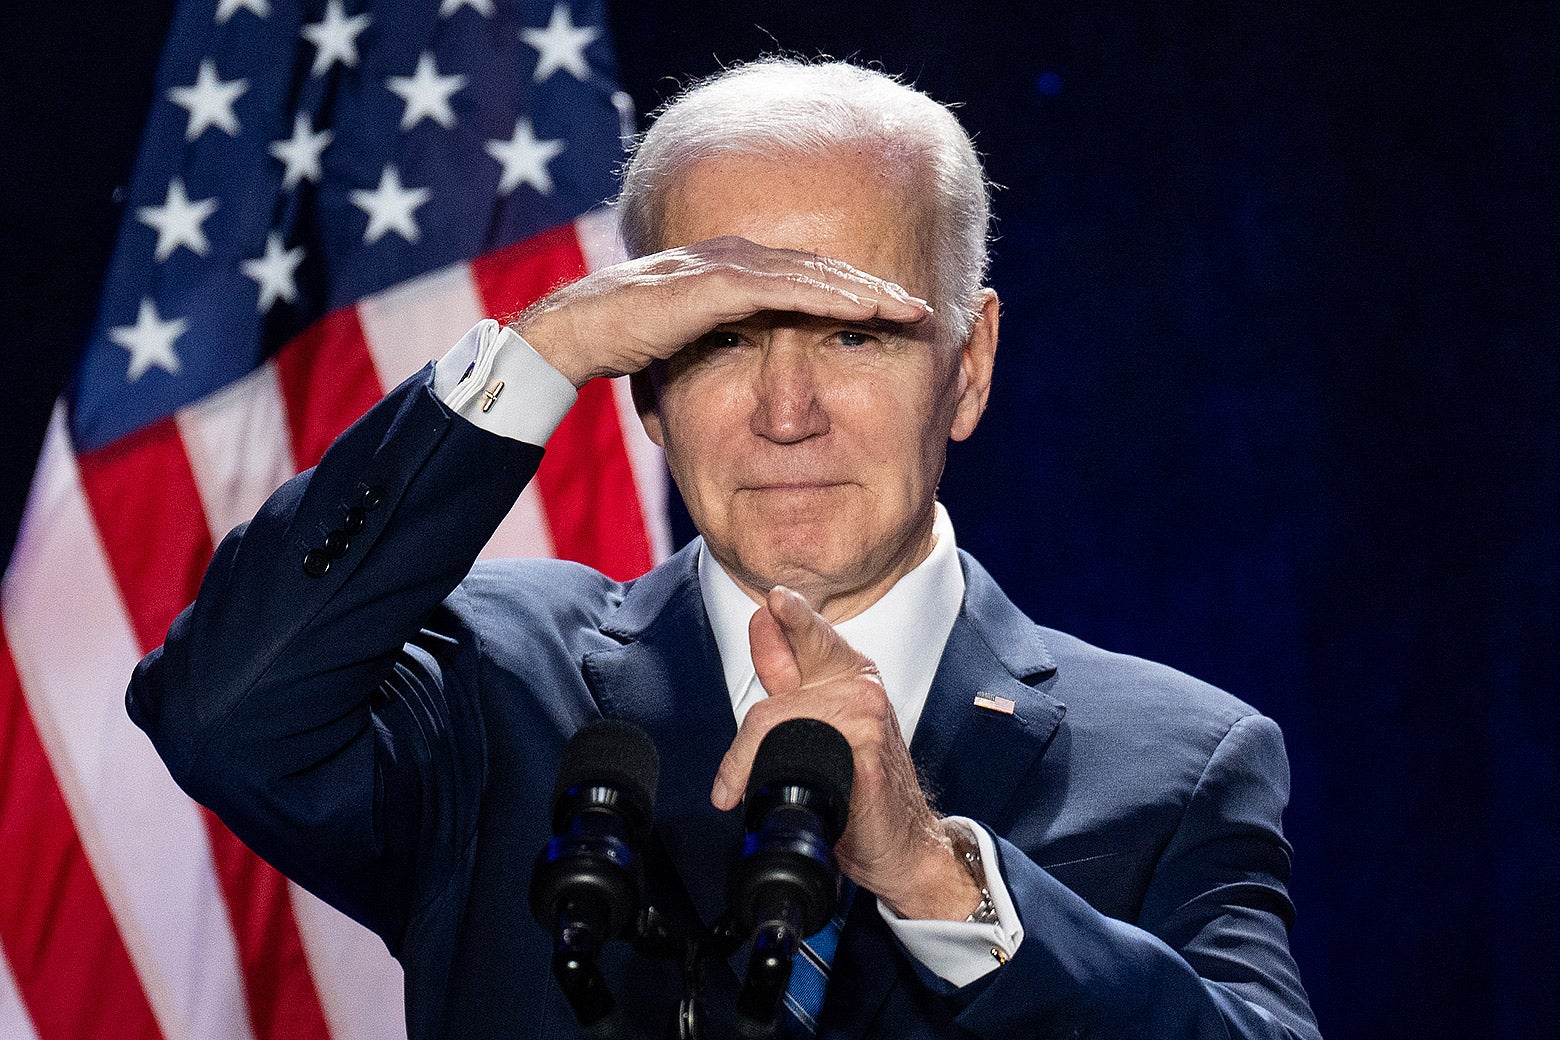 Joe Biden at a podium pointing and covering his eyes from a glare.